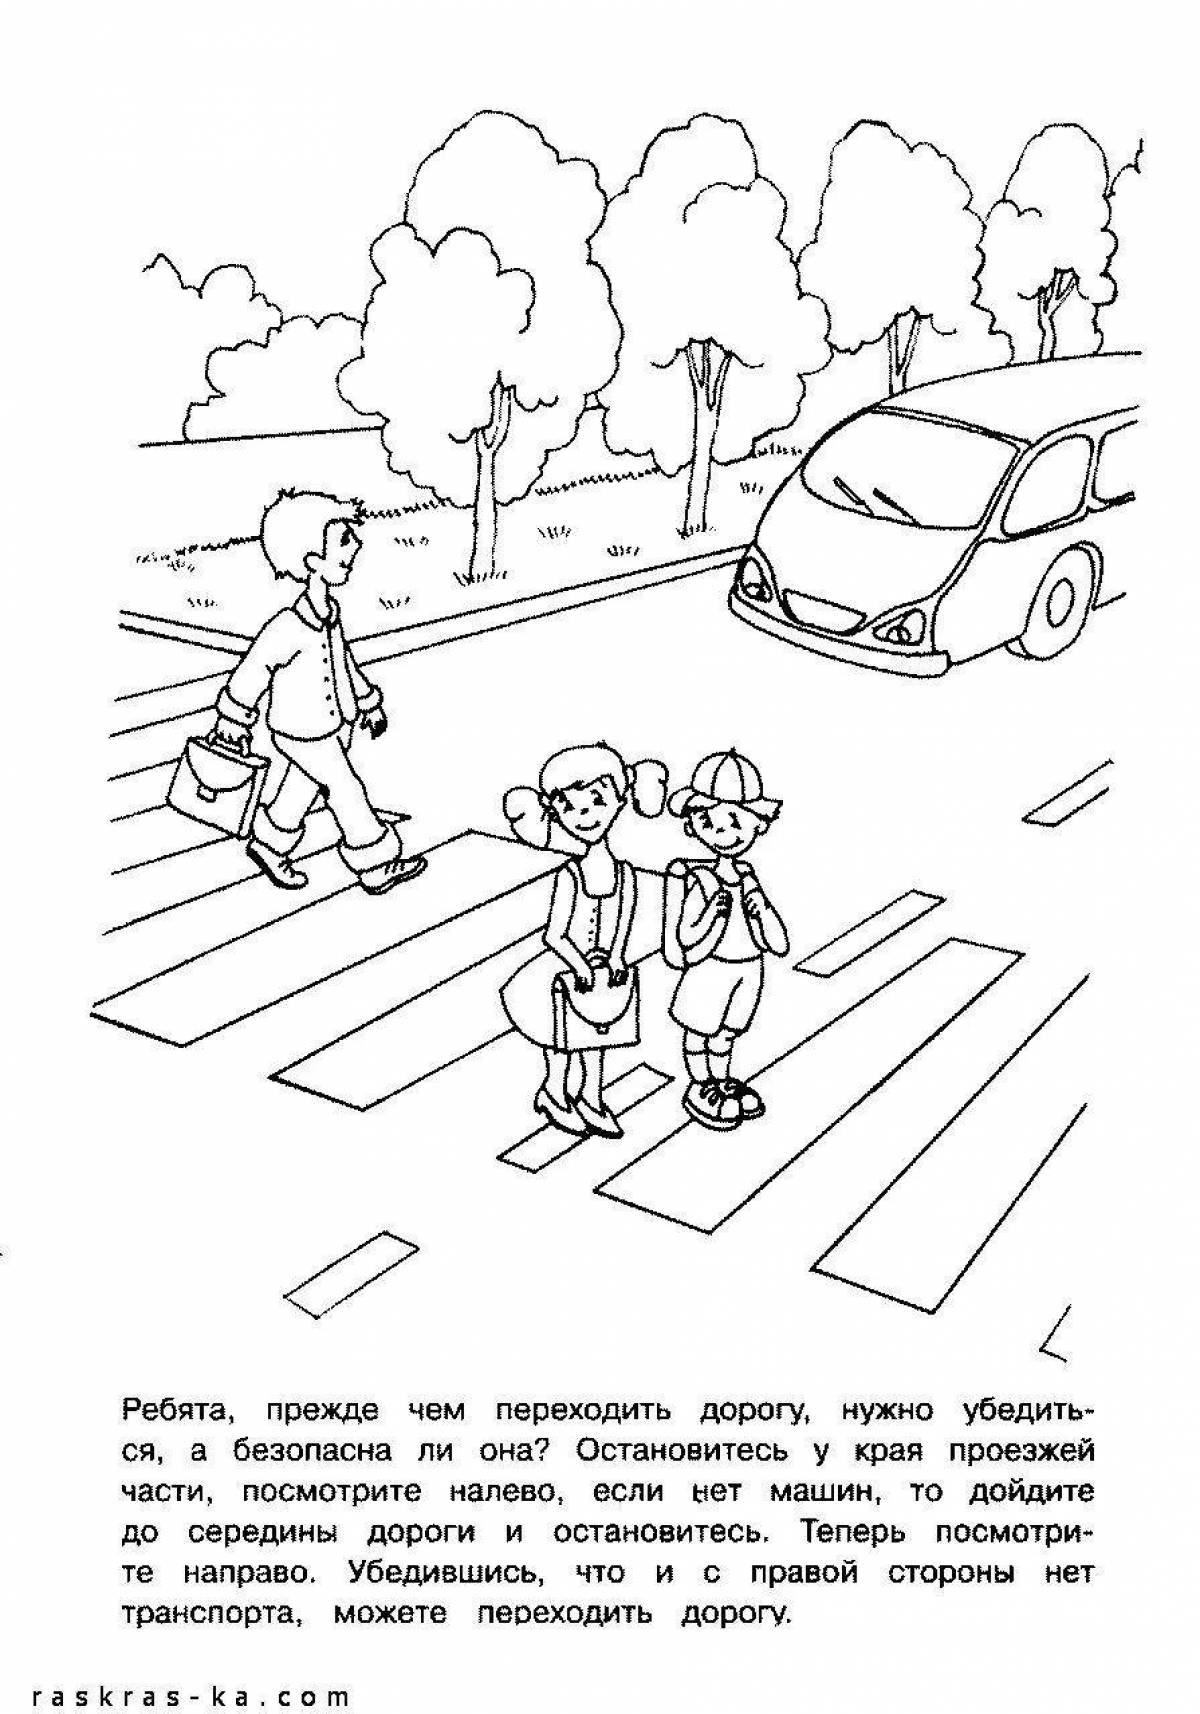 Complex coloring according to the rules of the road in kindergarten